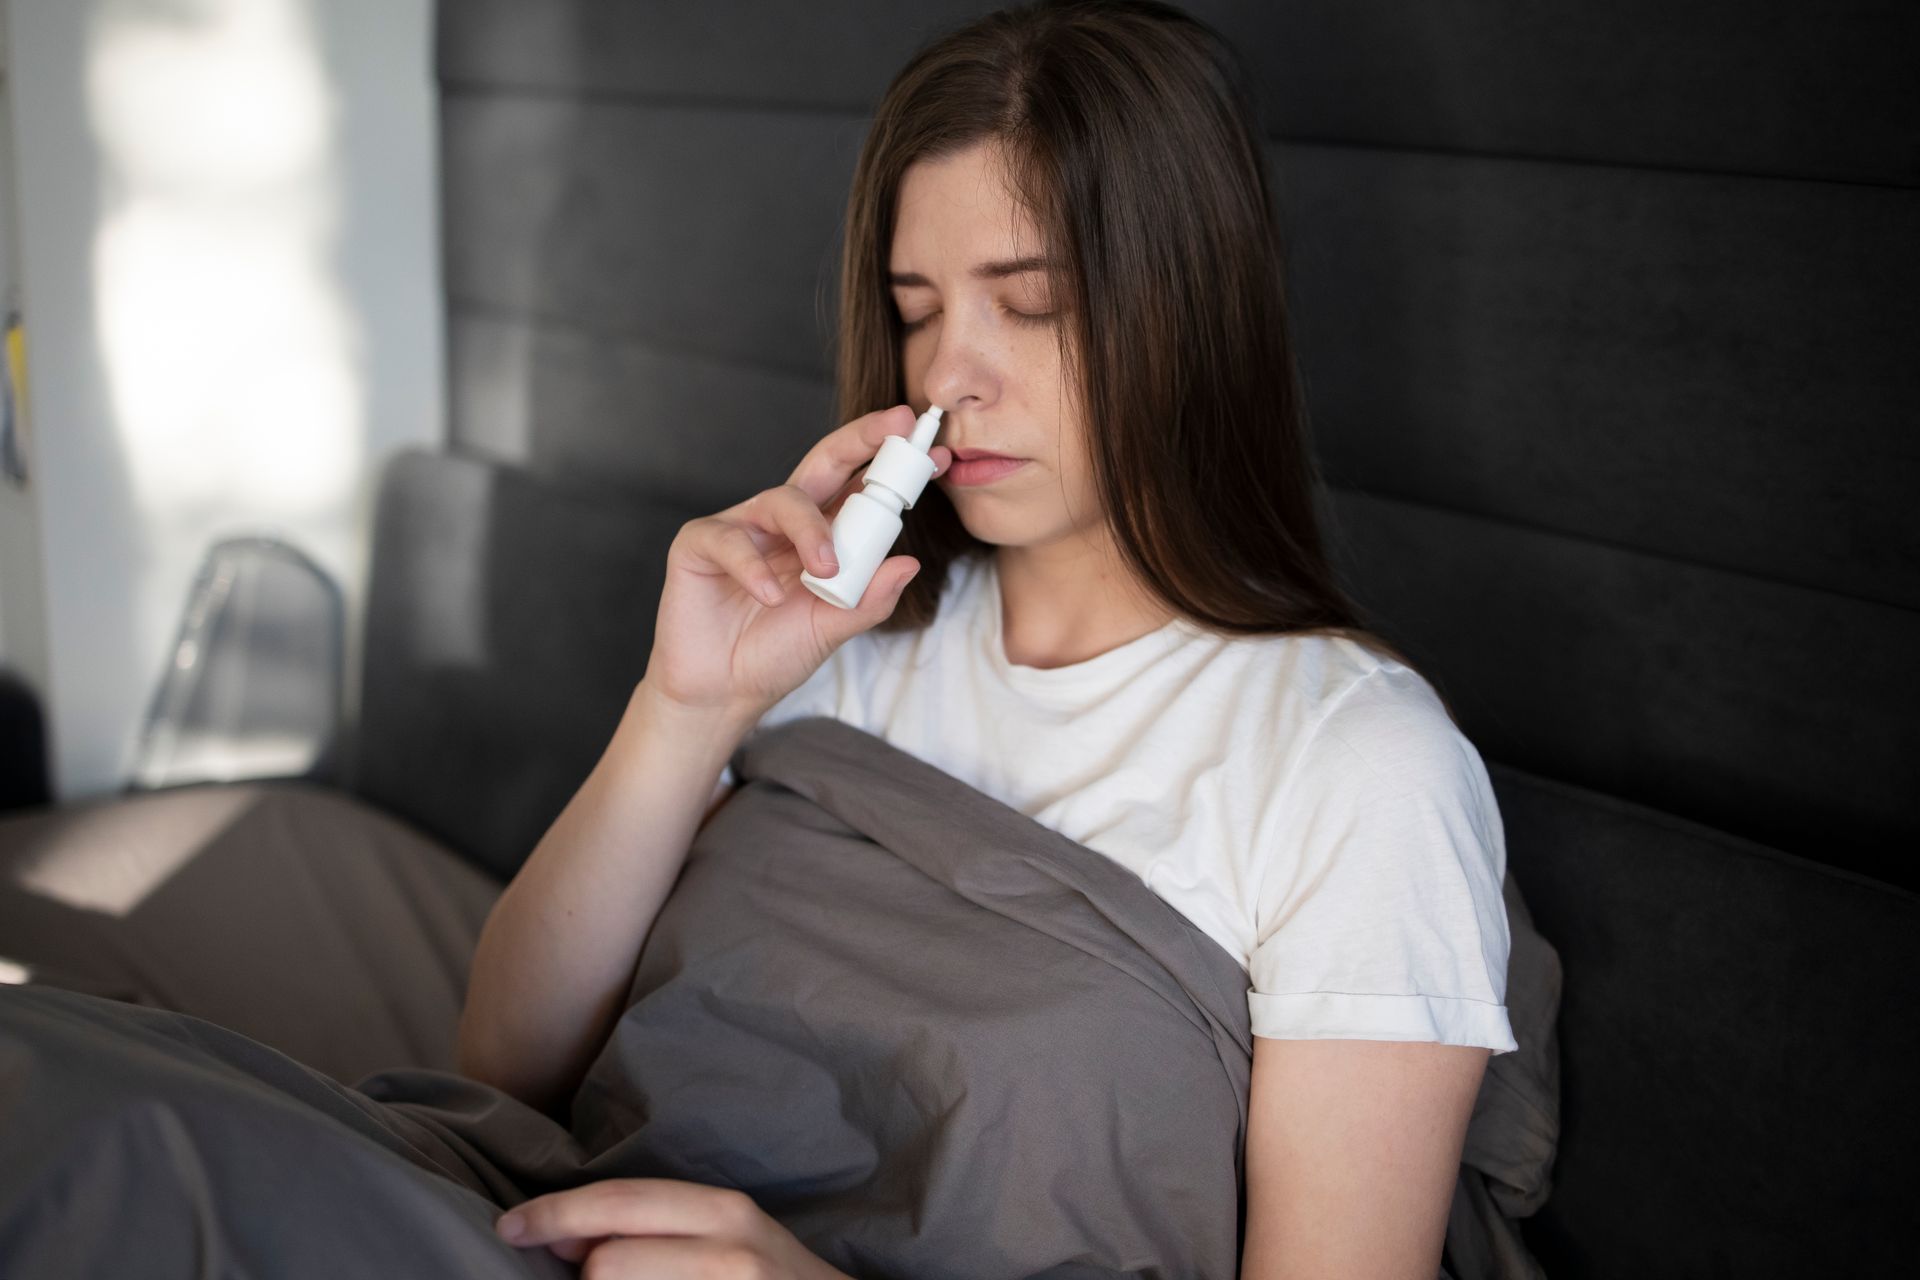 A woman with nasal congestion spraying decongestant medication